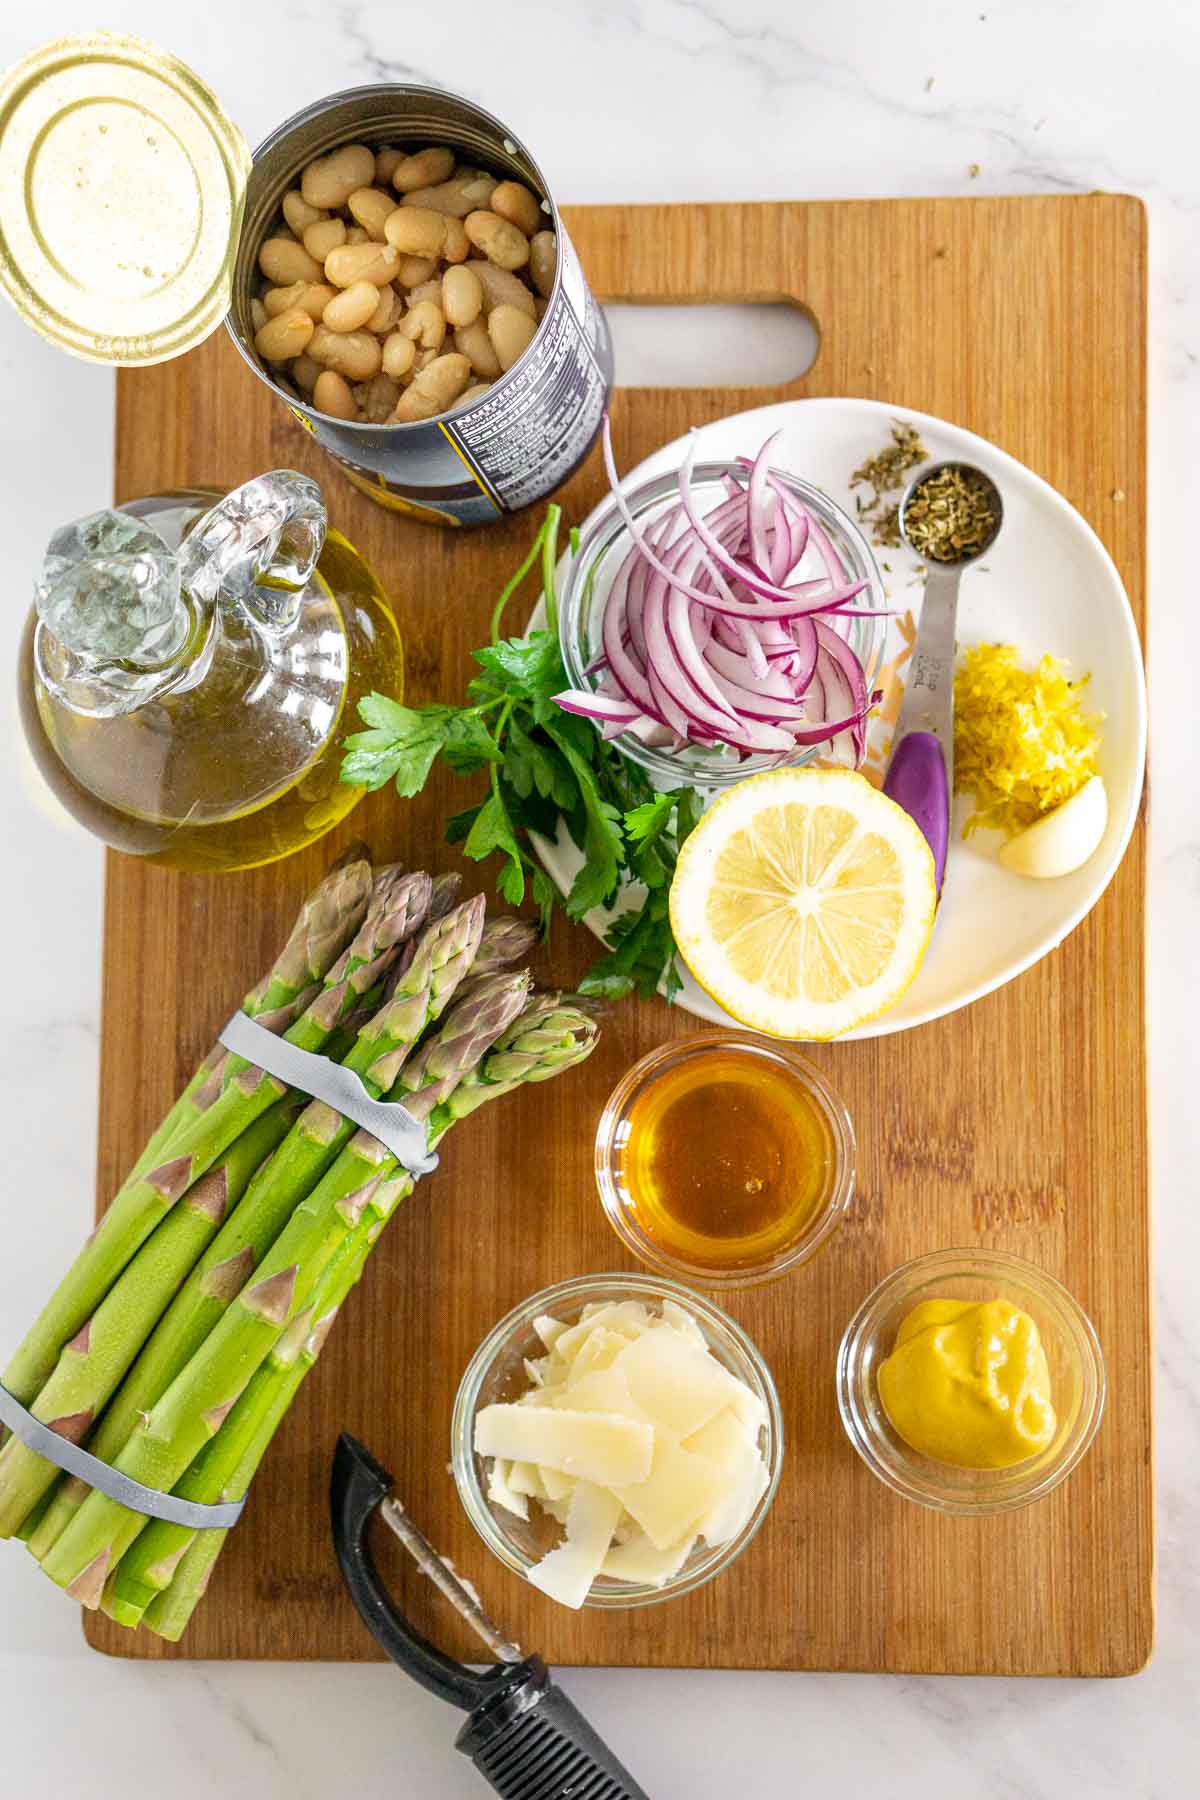 Ingredients to make asparagus and white bean salad.